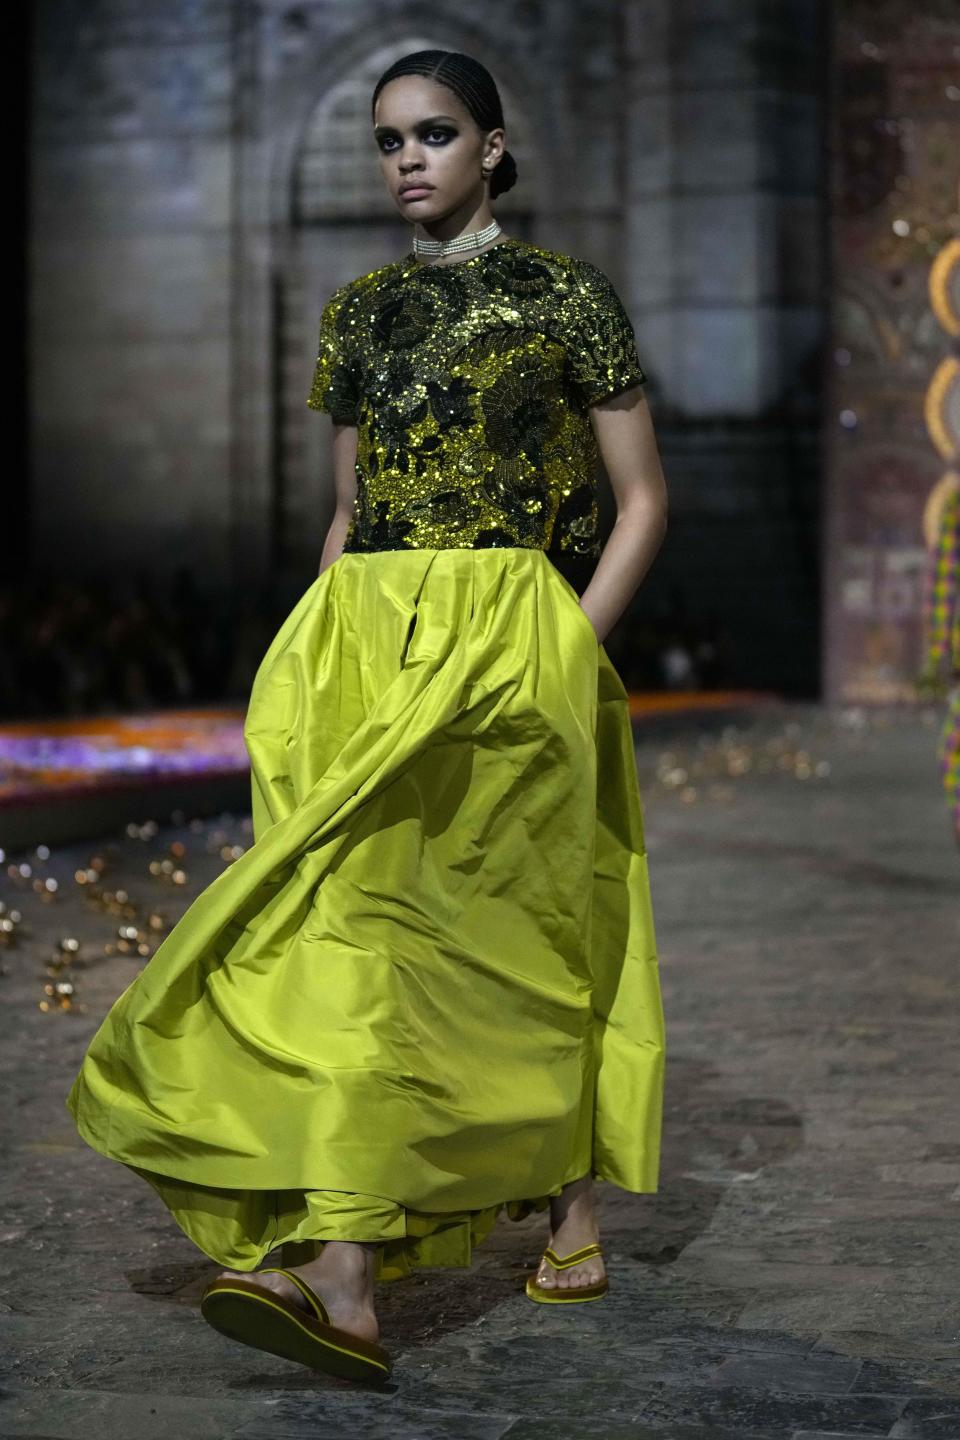 A model wears a creation for the Dior Pre-Fall 2023 collection at the Gateway of India landmark monument in Mumbai, India, Thursday, March 30, 2023. (AP Photo/Rafiq Maqbool)